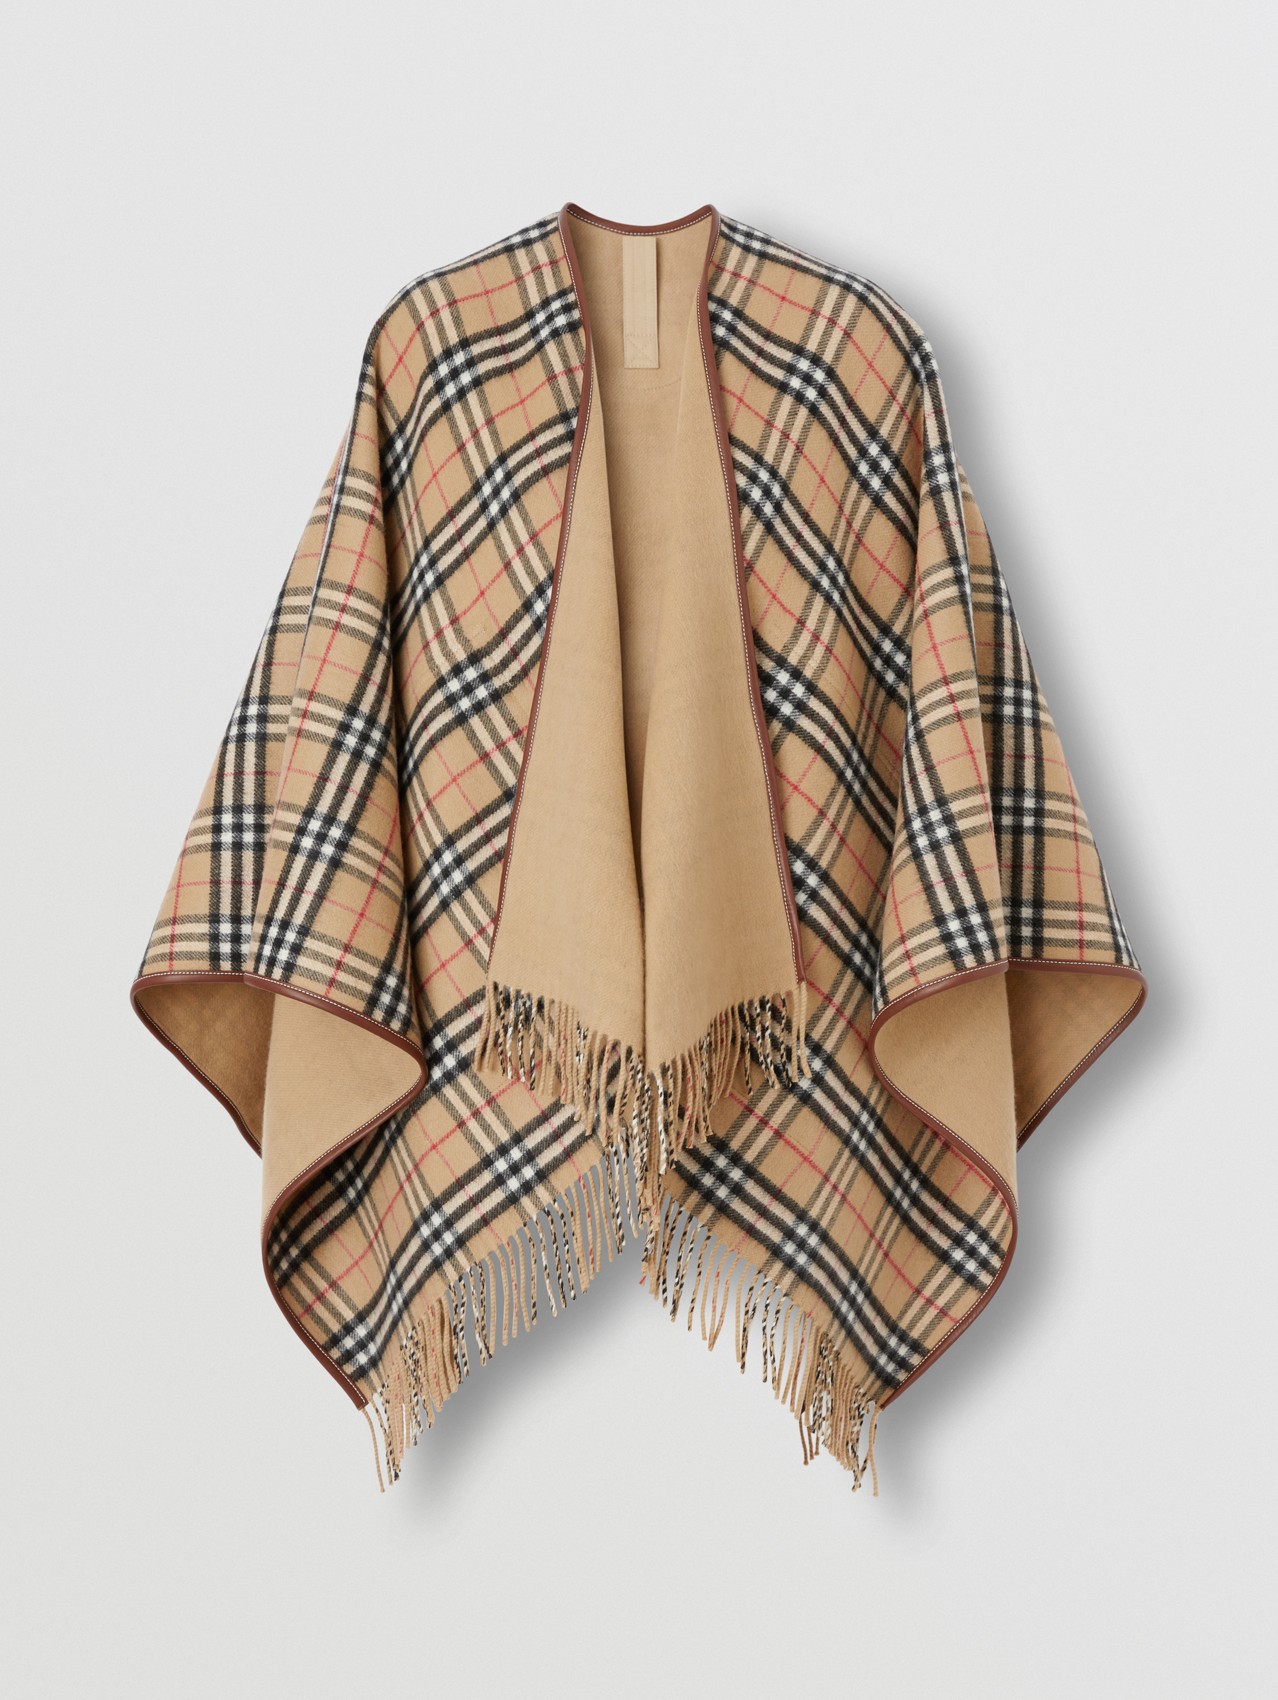 Reversible Vintage Check Wool Cashmere Cape in Archive Beige